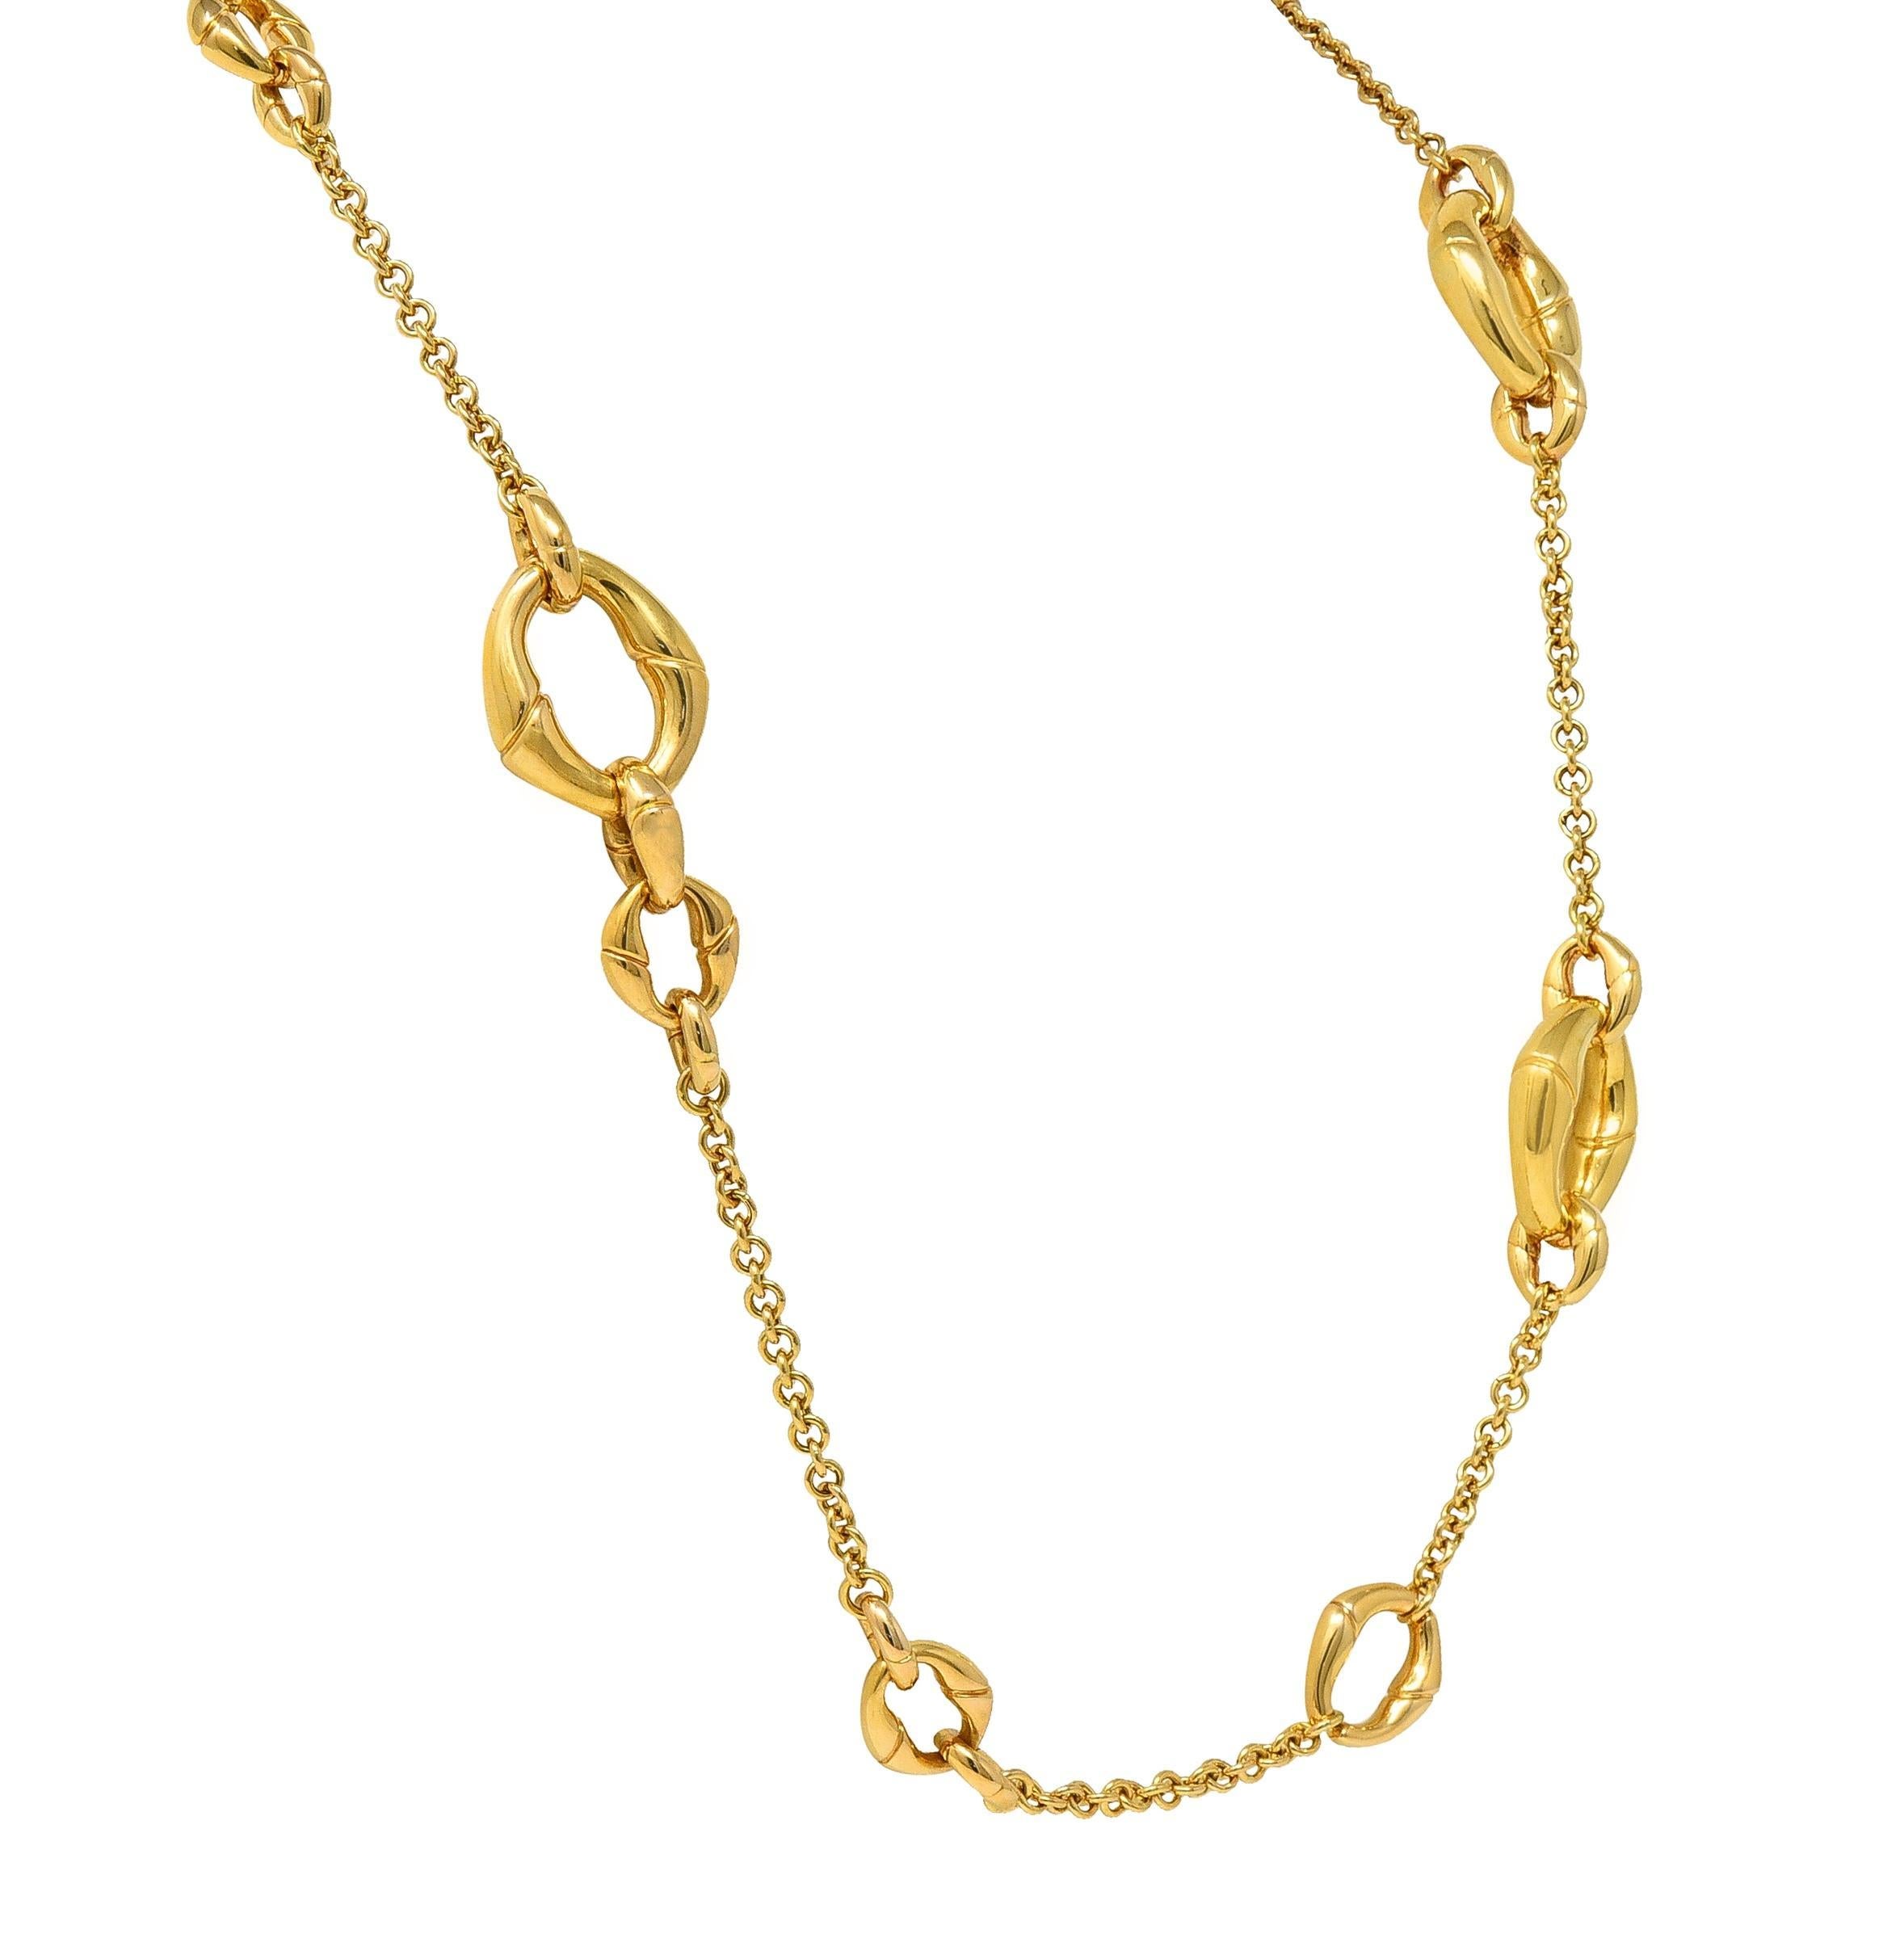 Gucci Contemporary 18 Karat Yellow Gold Bamboo Link Station Necklace For Sale 9